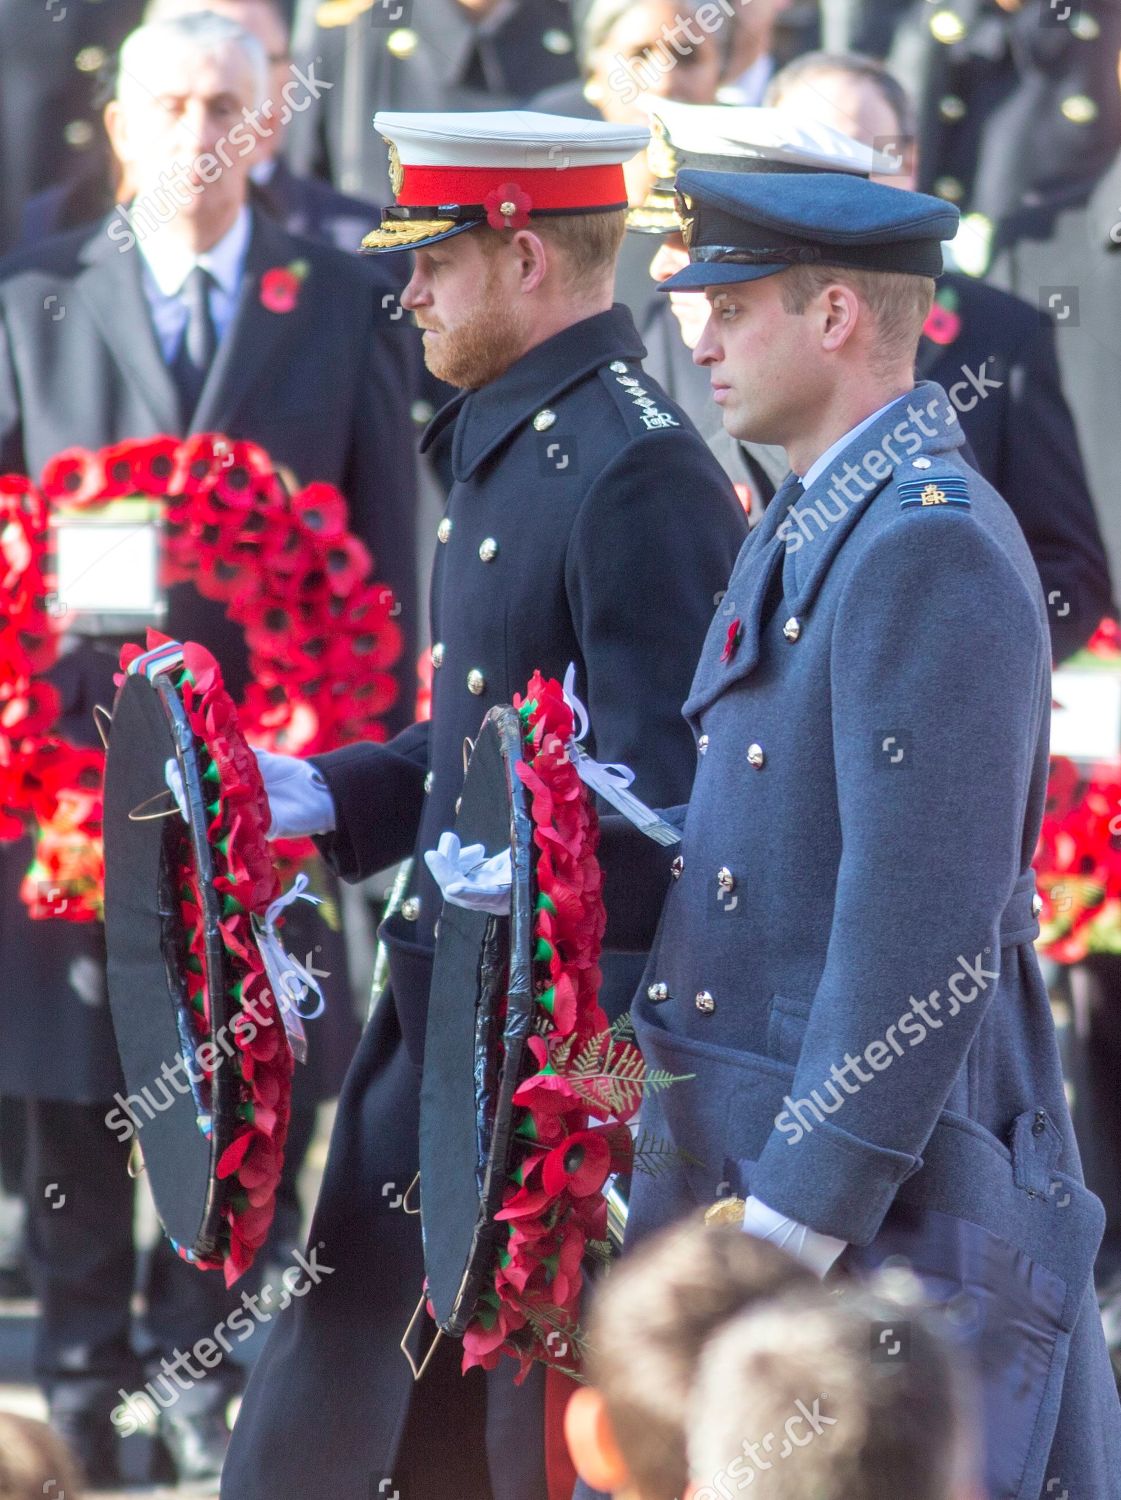 remembrance-day-service-the-cenotaph-whitehall-london-uk-shutterstock-editorial-10470869p.jpg